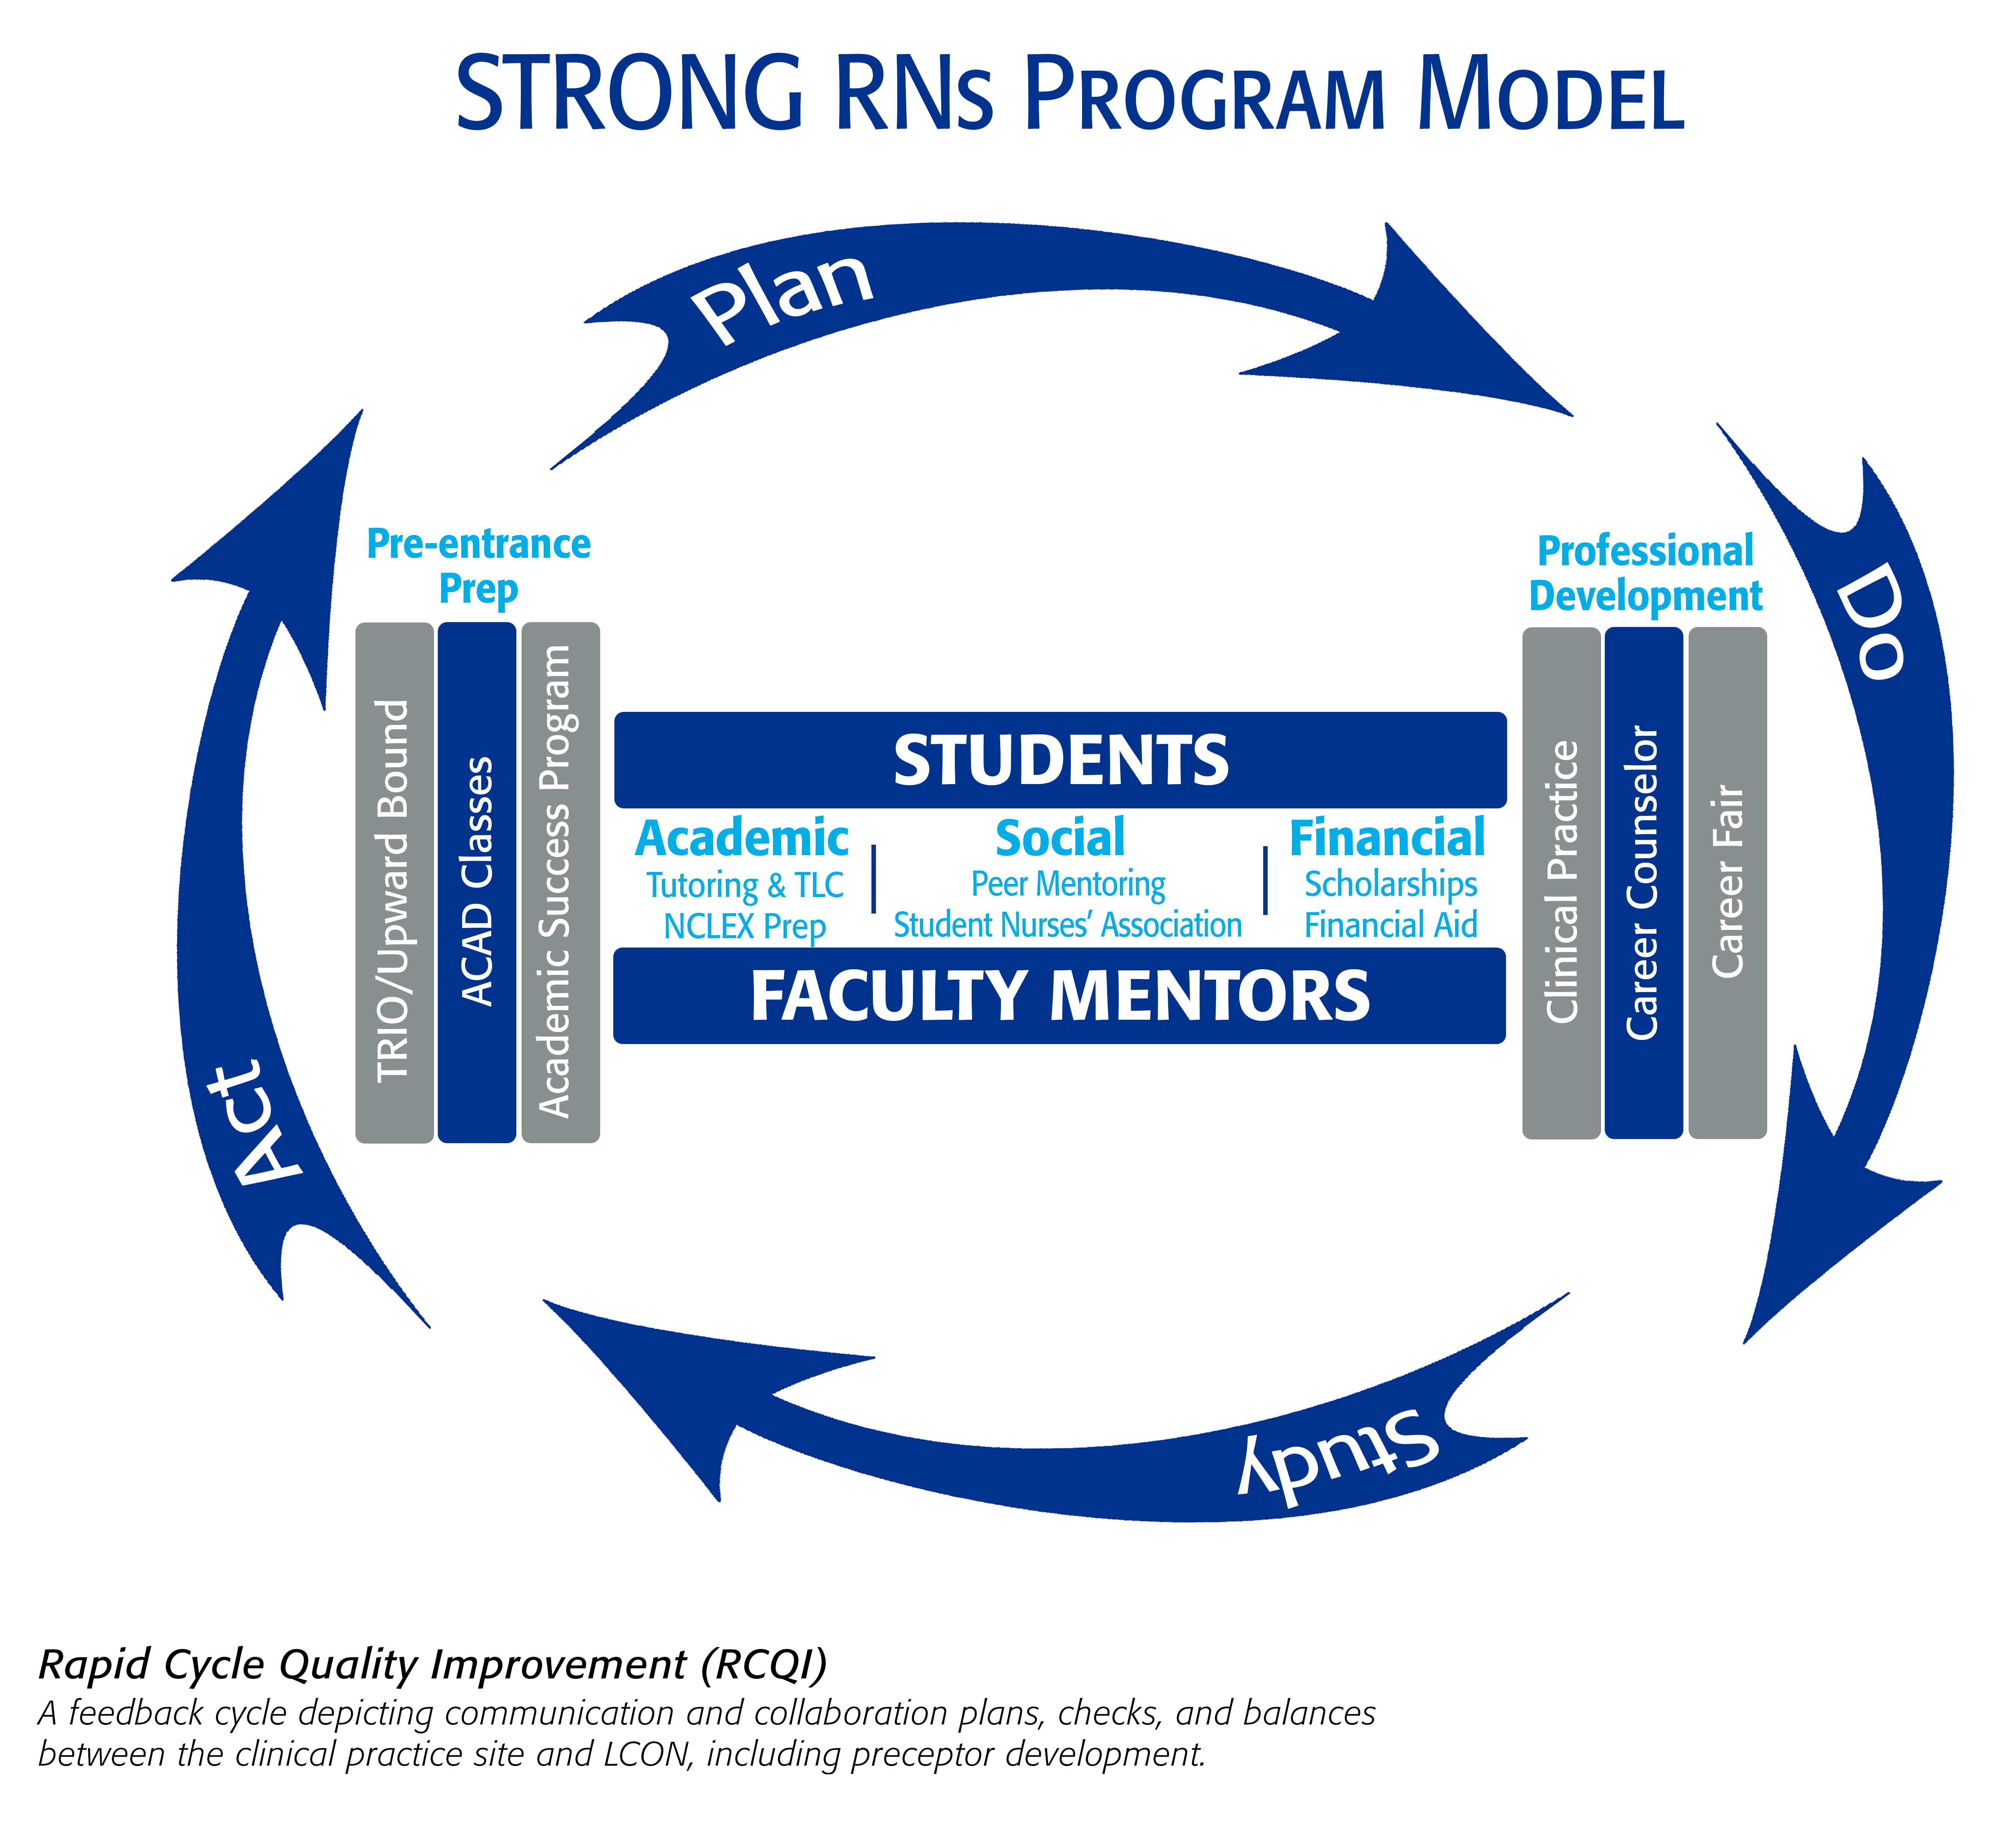 Strong RNs model in image form